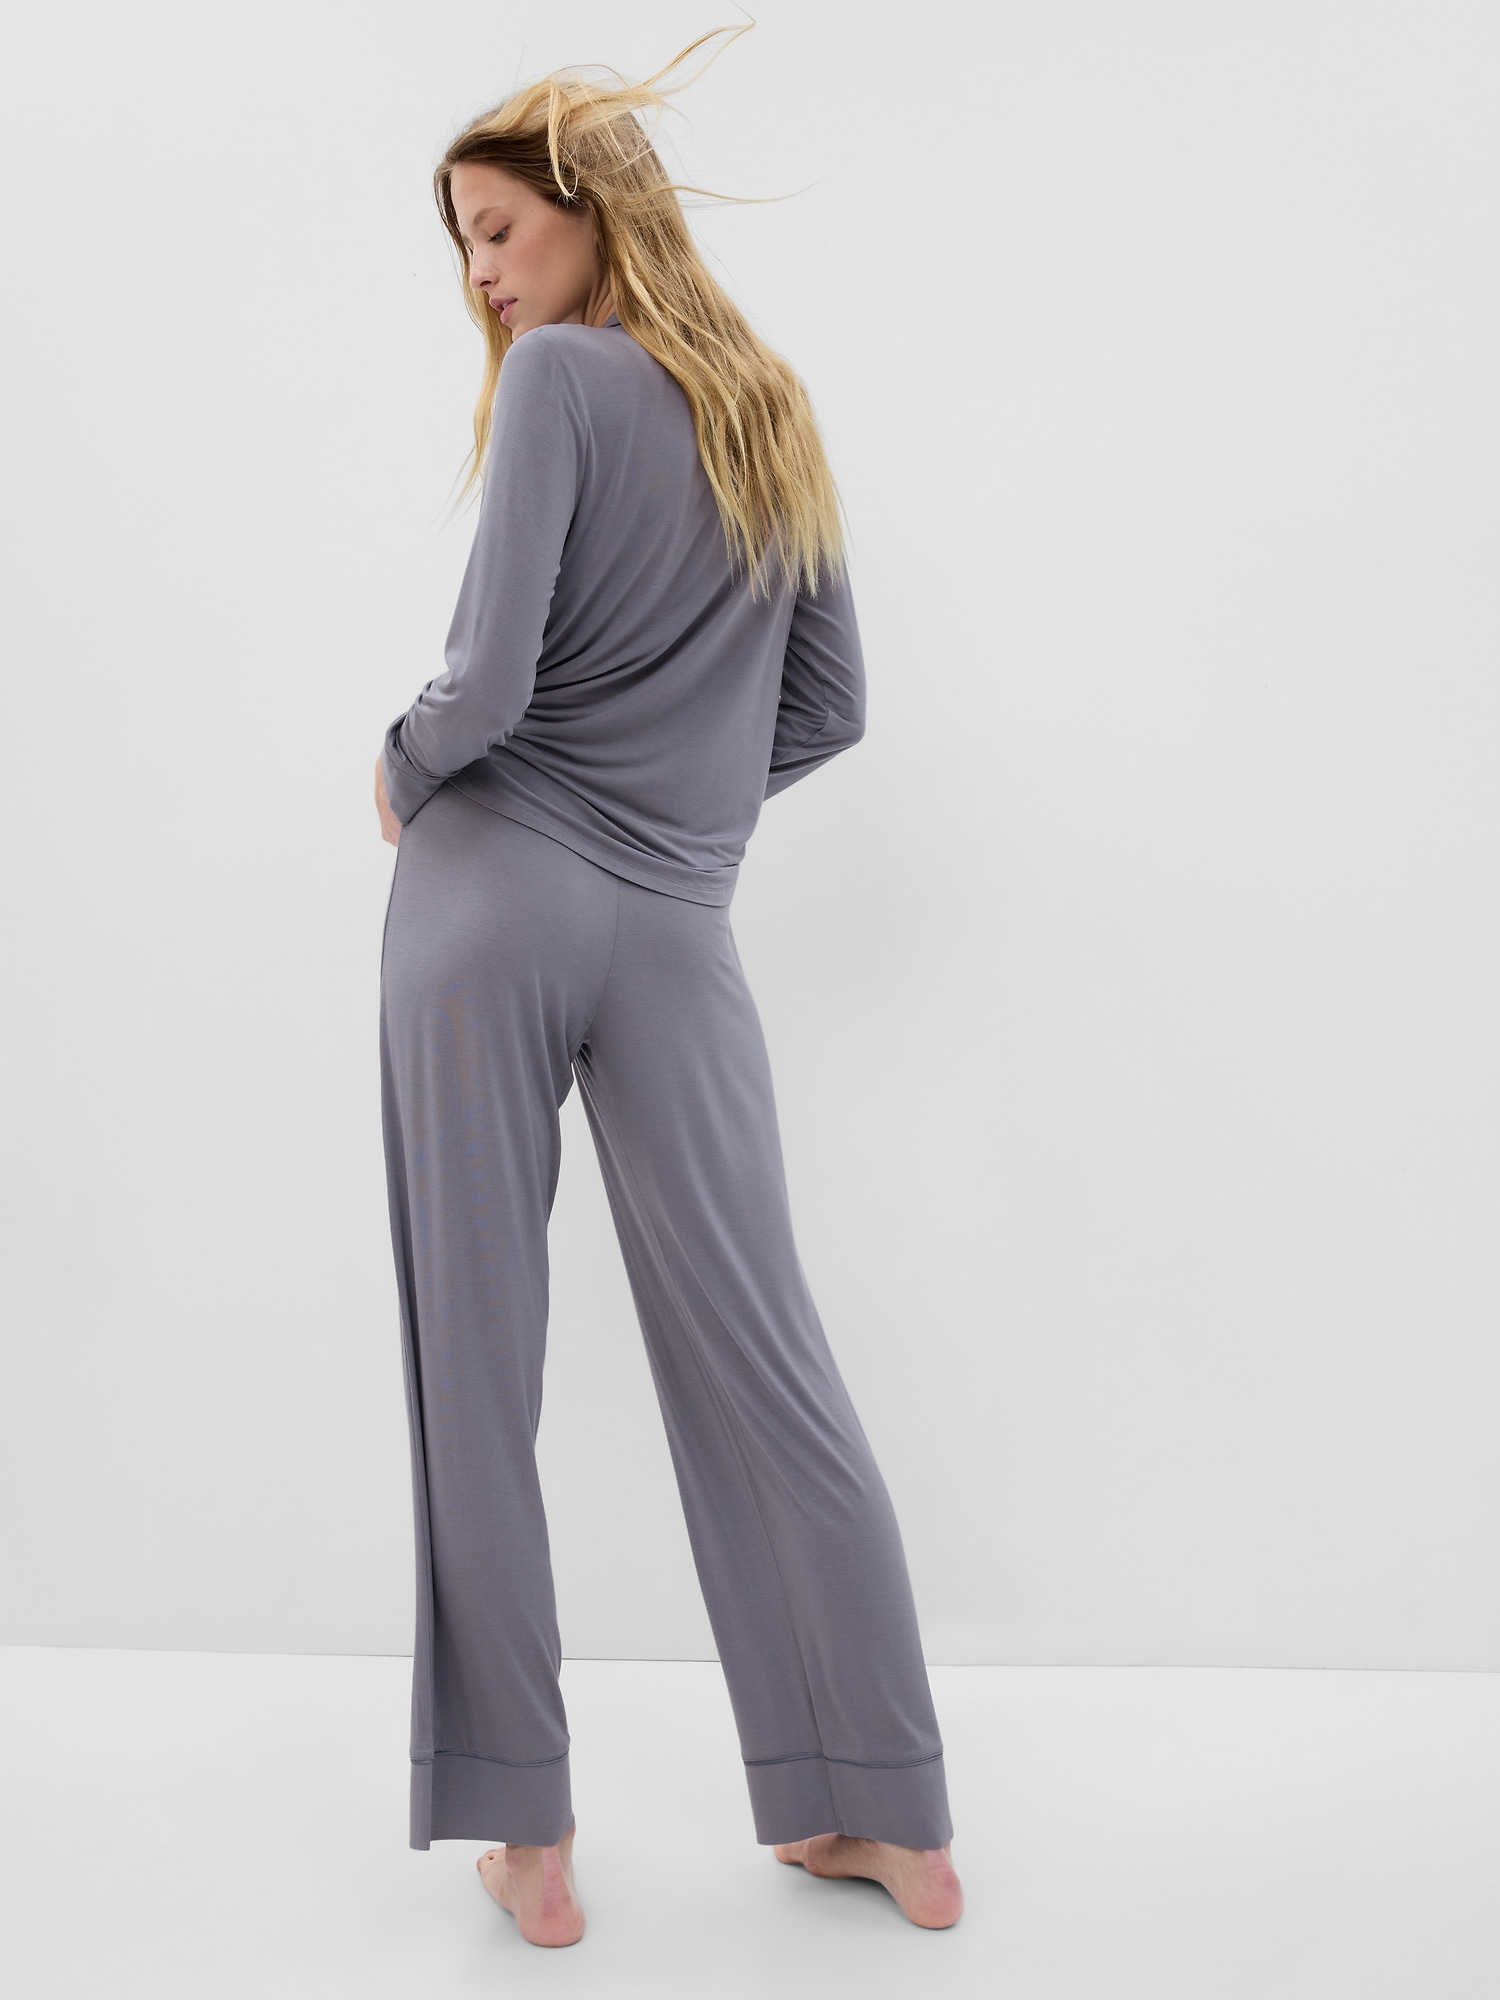 This Is That Feeling Modal Poly Lounge Pants with Pockets - SET B